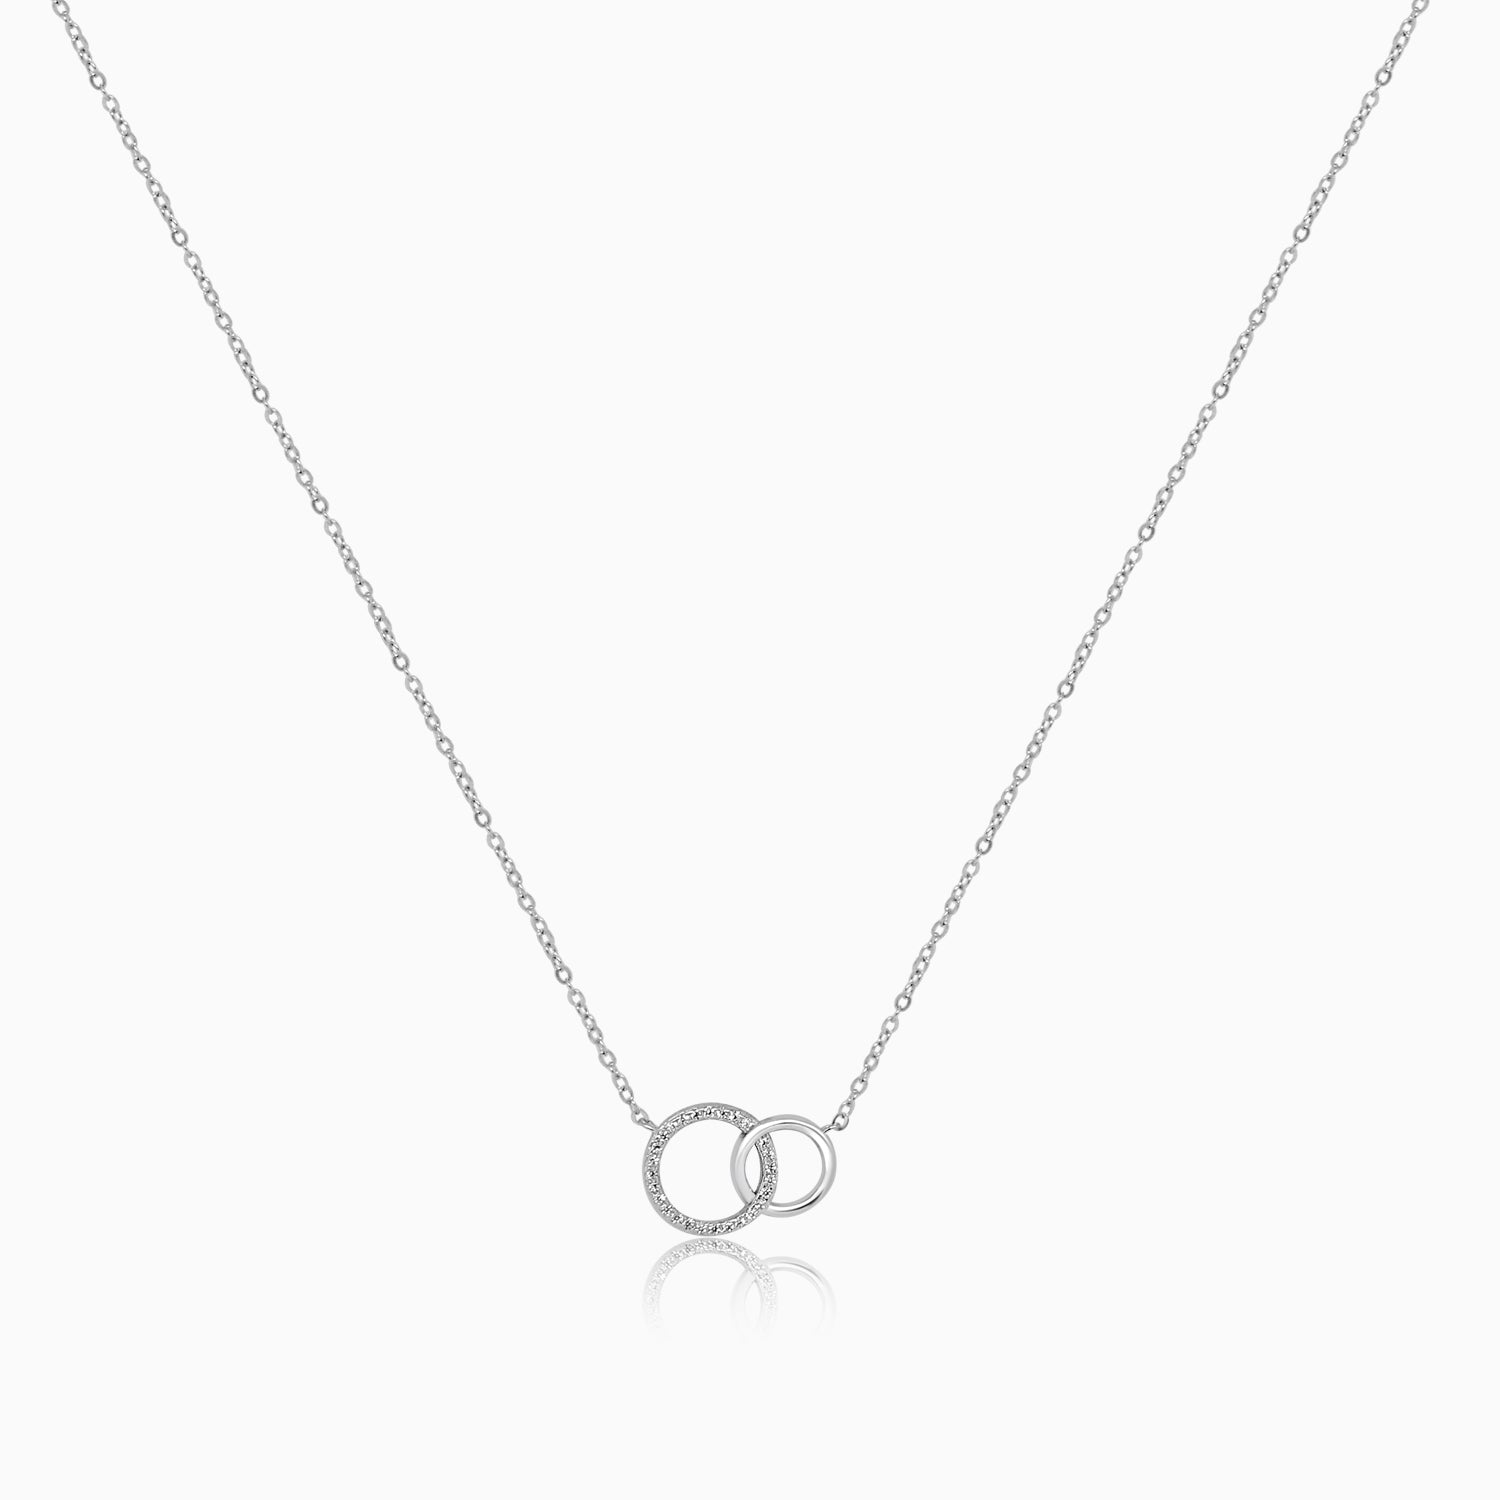 Silver Sparkling Intertwined Rings Necklace